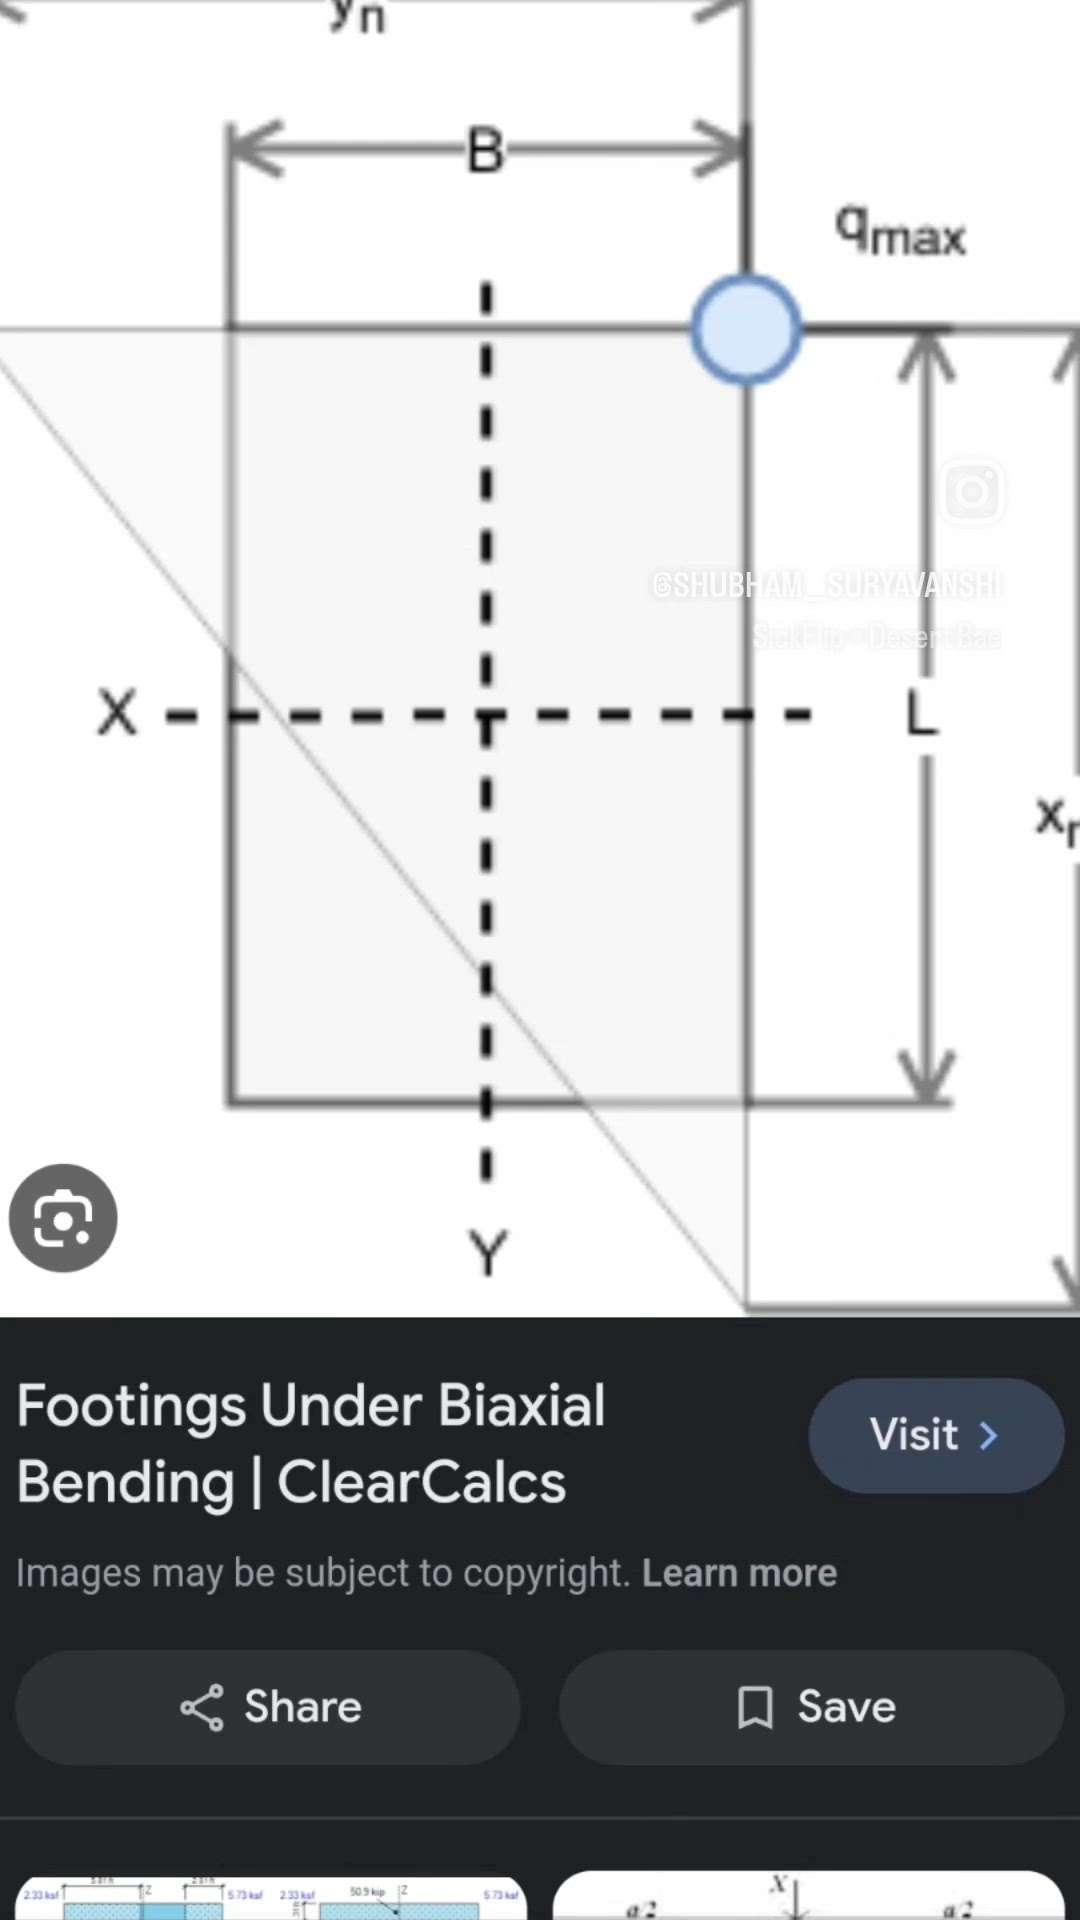 Biaxial Footing
We provide
✔️ Floor Planning,
✔️ Vastu consultation
✔️ site visit, 
✔️ Steel Details,
✔️ 3D Elevation and further more!
#civil #civilengineering #engineering #plan #planning #houseplans #nature #house #elevation #blueprint #staircase #roomdecor #design #housedesign #skyscrapper #civilconstruction #houseproject #construction #dreamhouse #dreamhome #architecture #architecturephotography #architecturedesign #autocad #staadpro #staad #bathroom